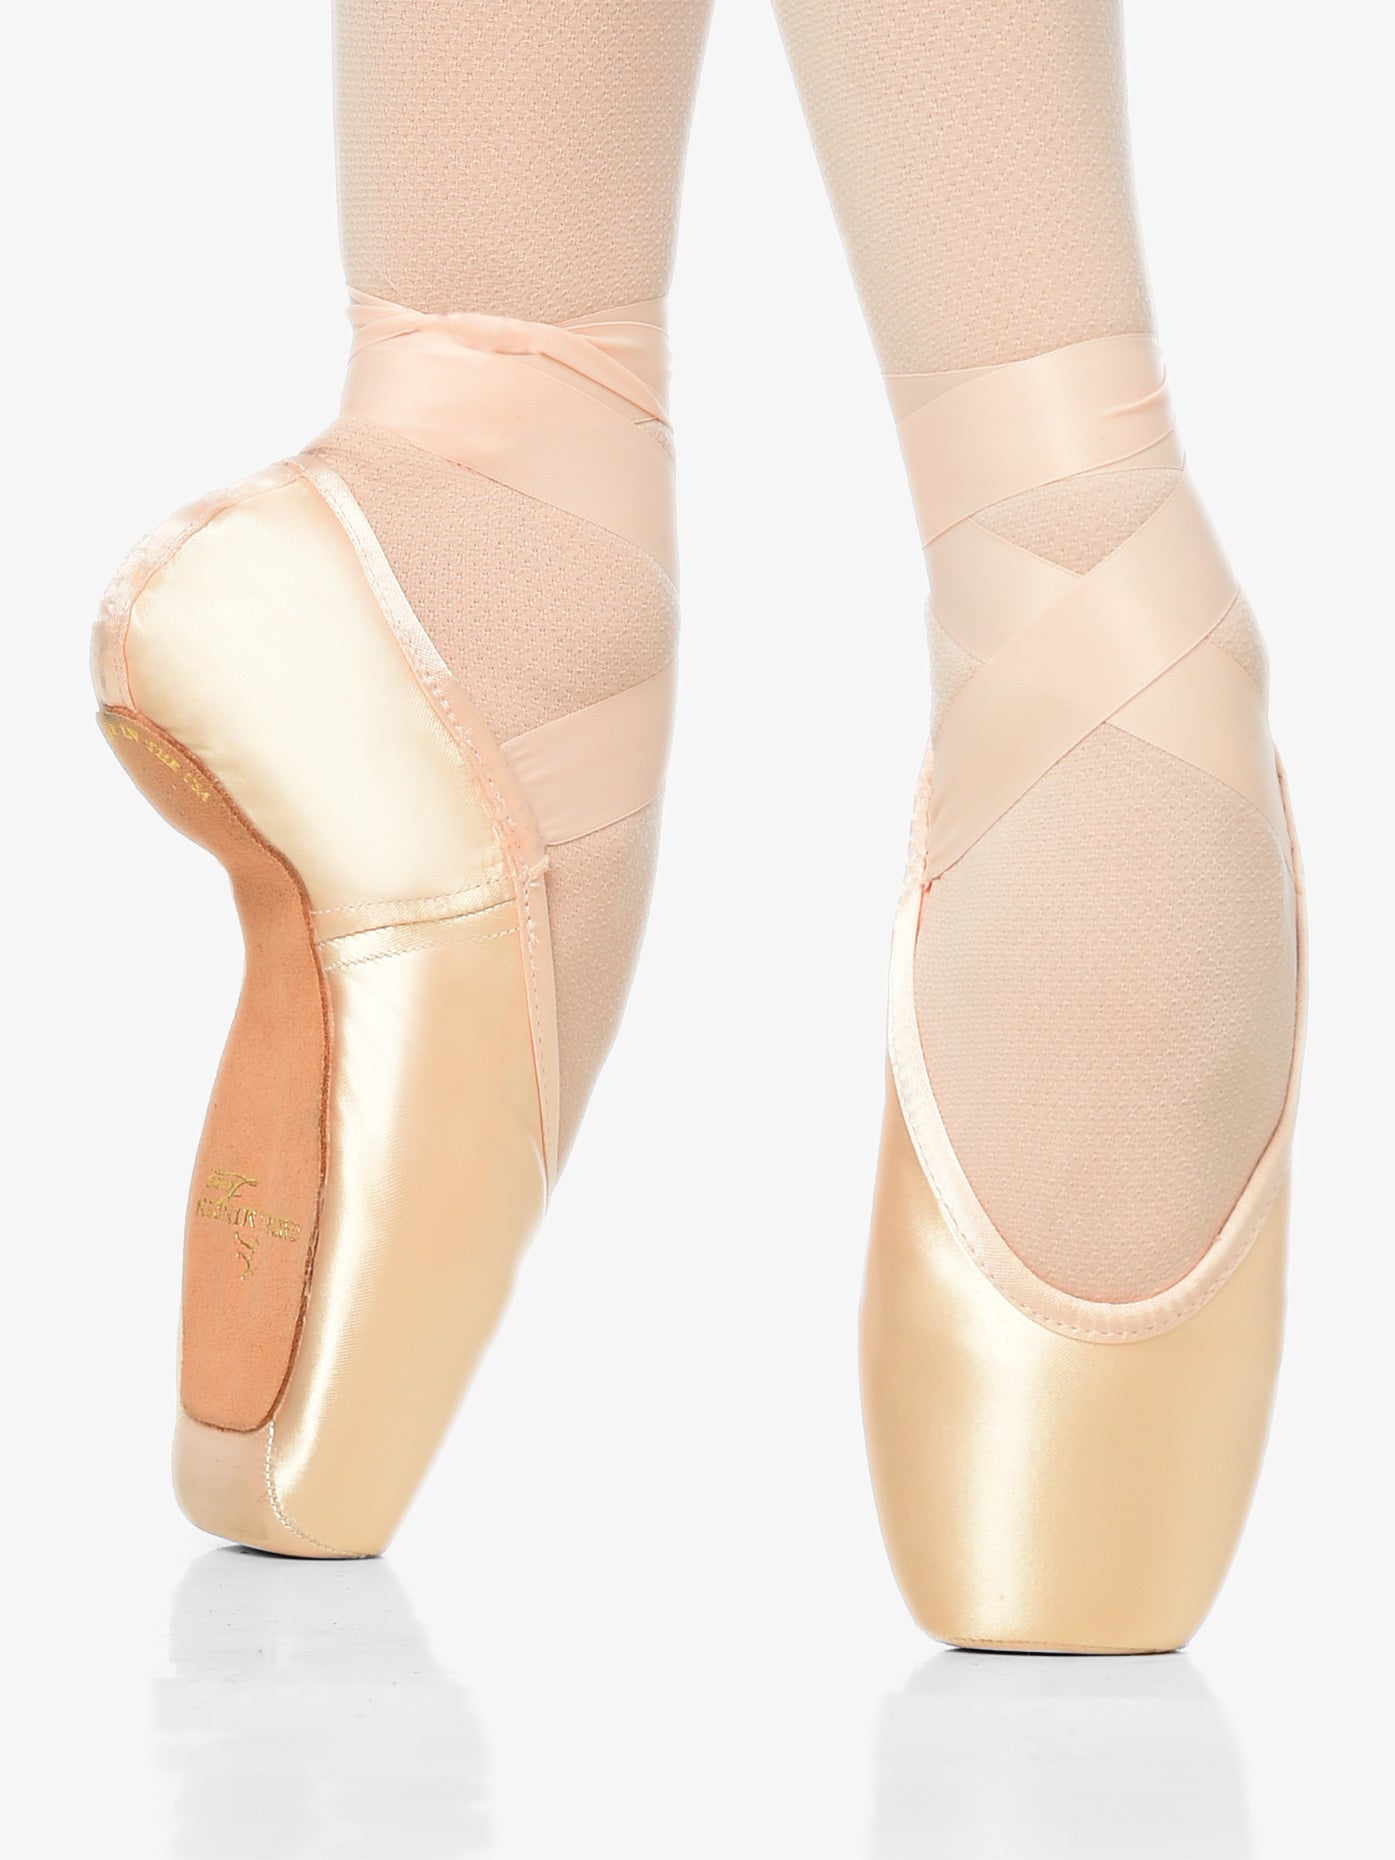 Gaynor Minden Europa Sculpted Pointe Shoes-Clearance FINAL SALE